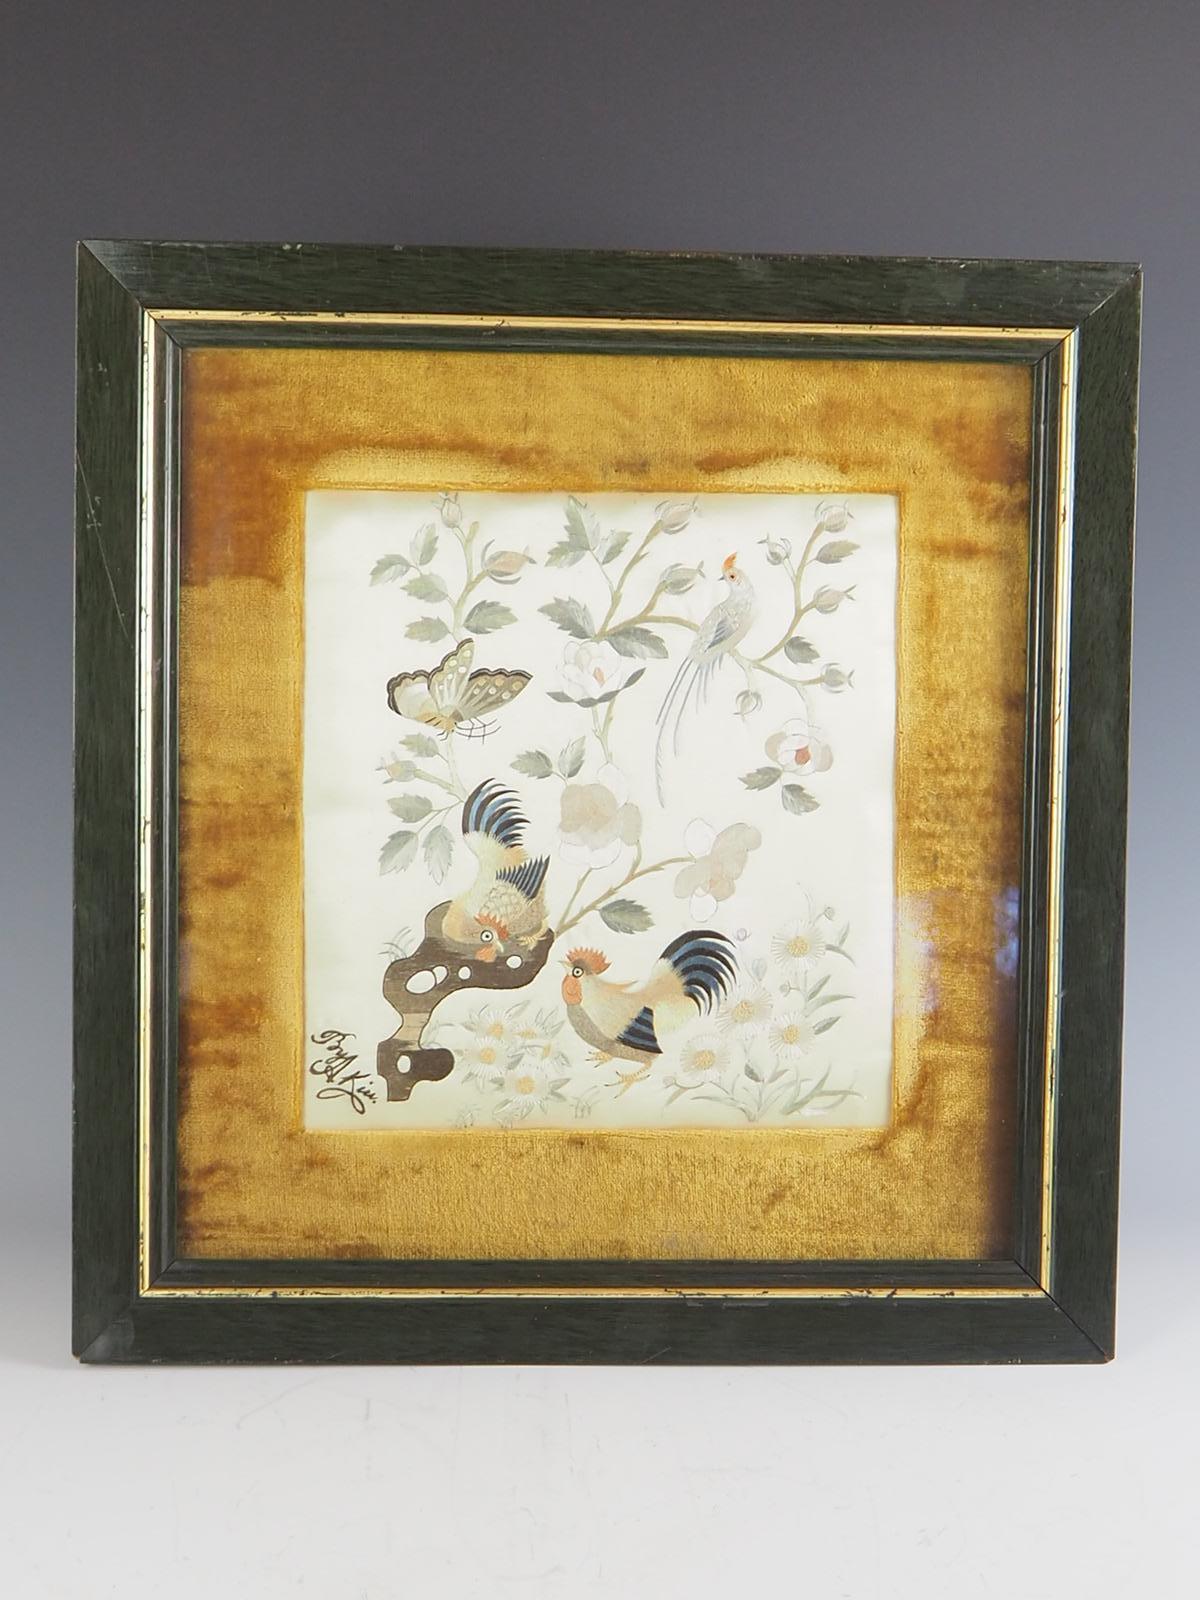 Framed 19th century Chinese silk birds embroidery.

Exquisite hand embrioded silk featuring roosters, butterfly and bird in a nature scene framed in a quality velvet border.

Signed By A Kiu.